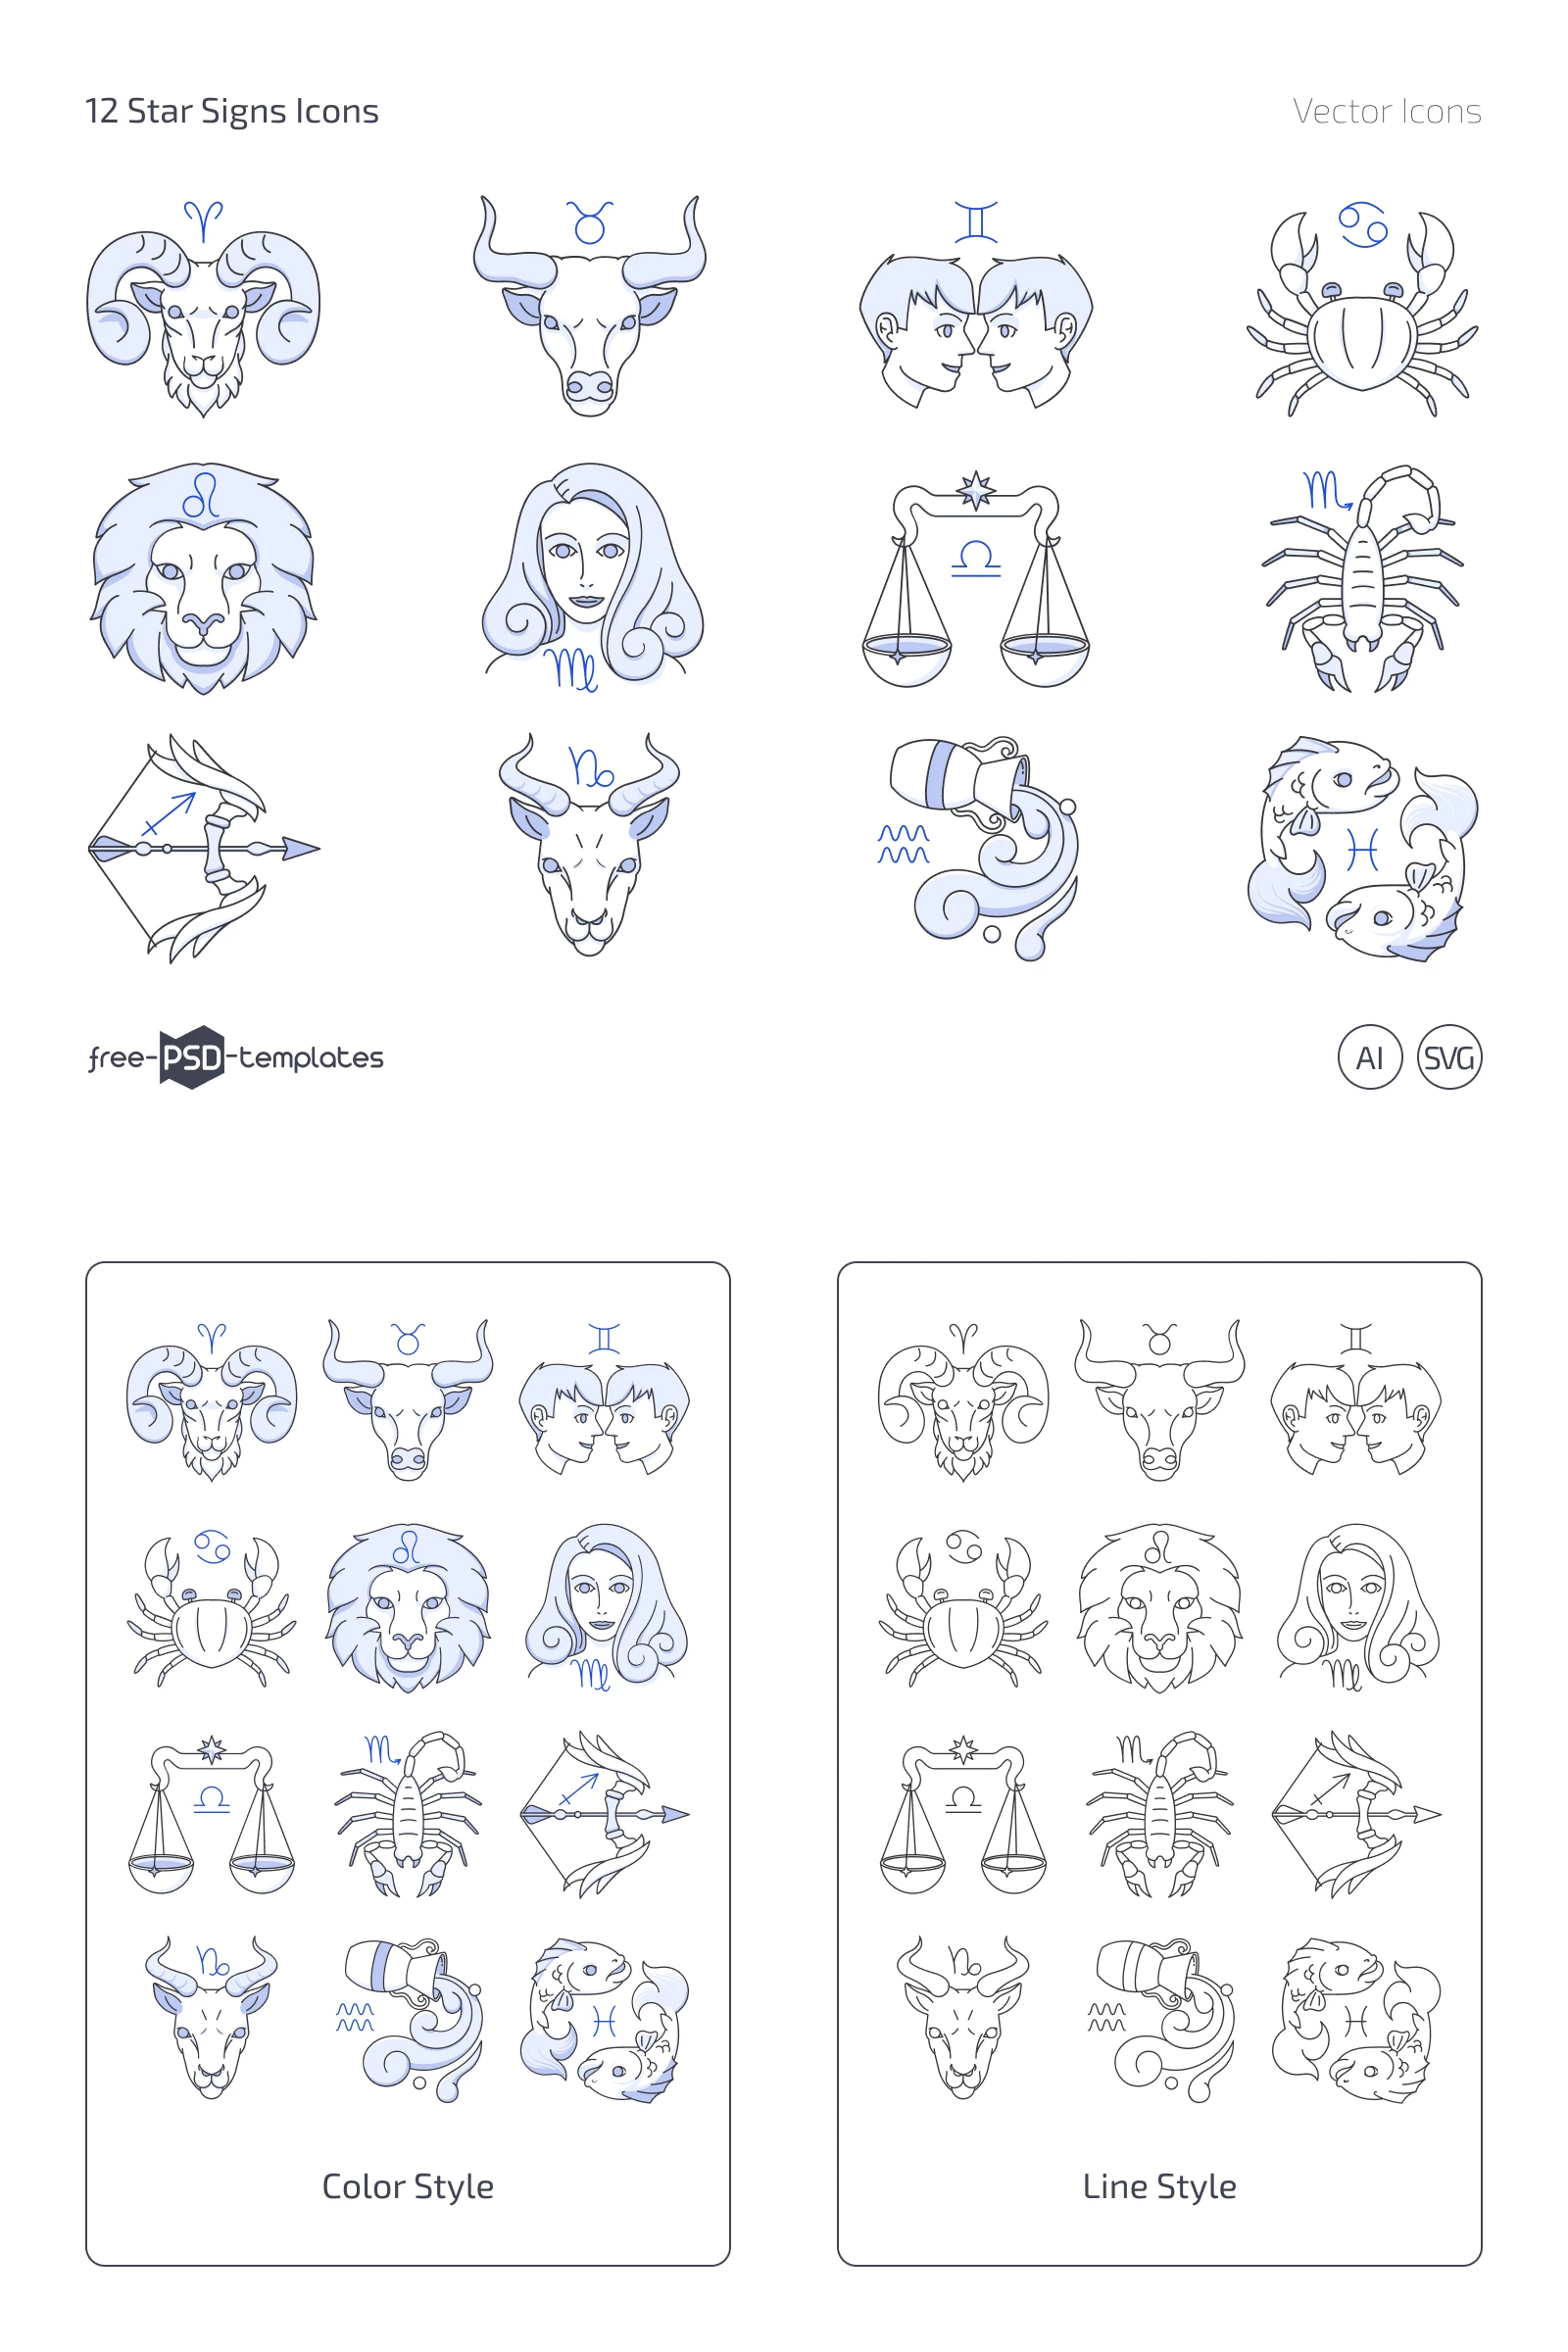 Free 12 Star Signs Icon Set (AI, SVG, PNG)